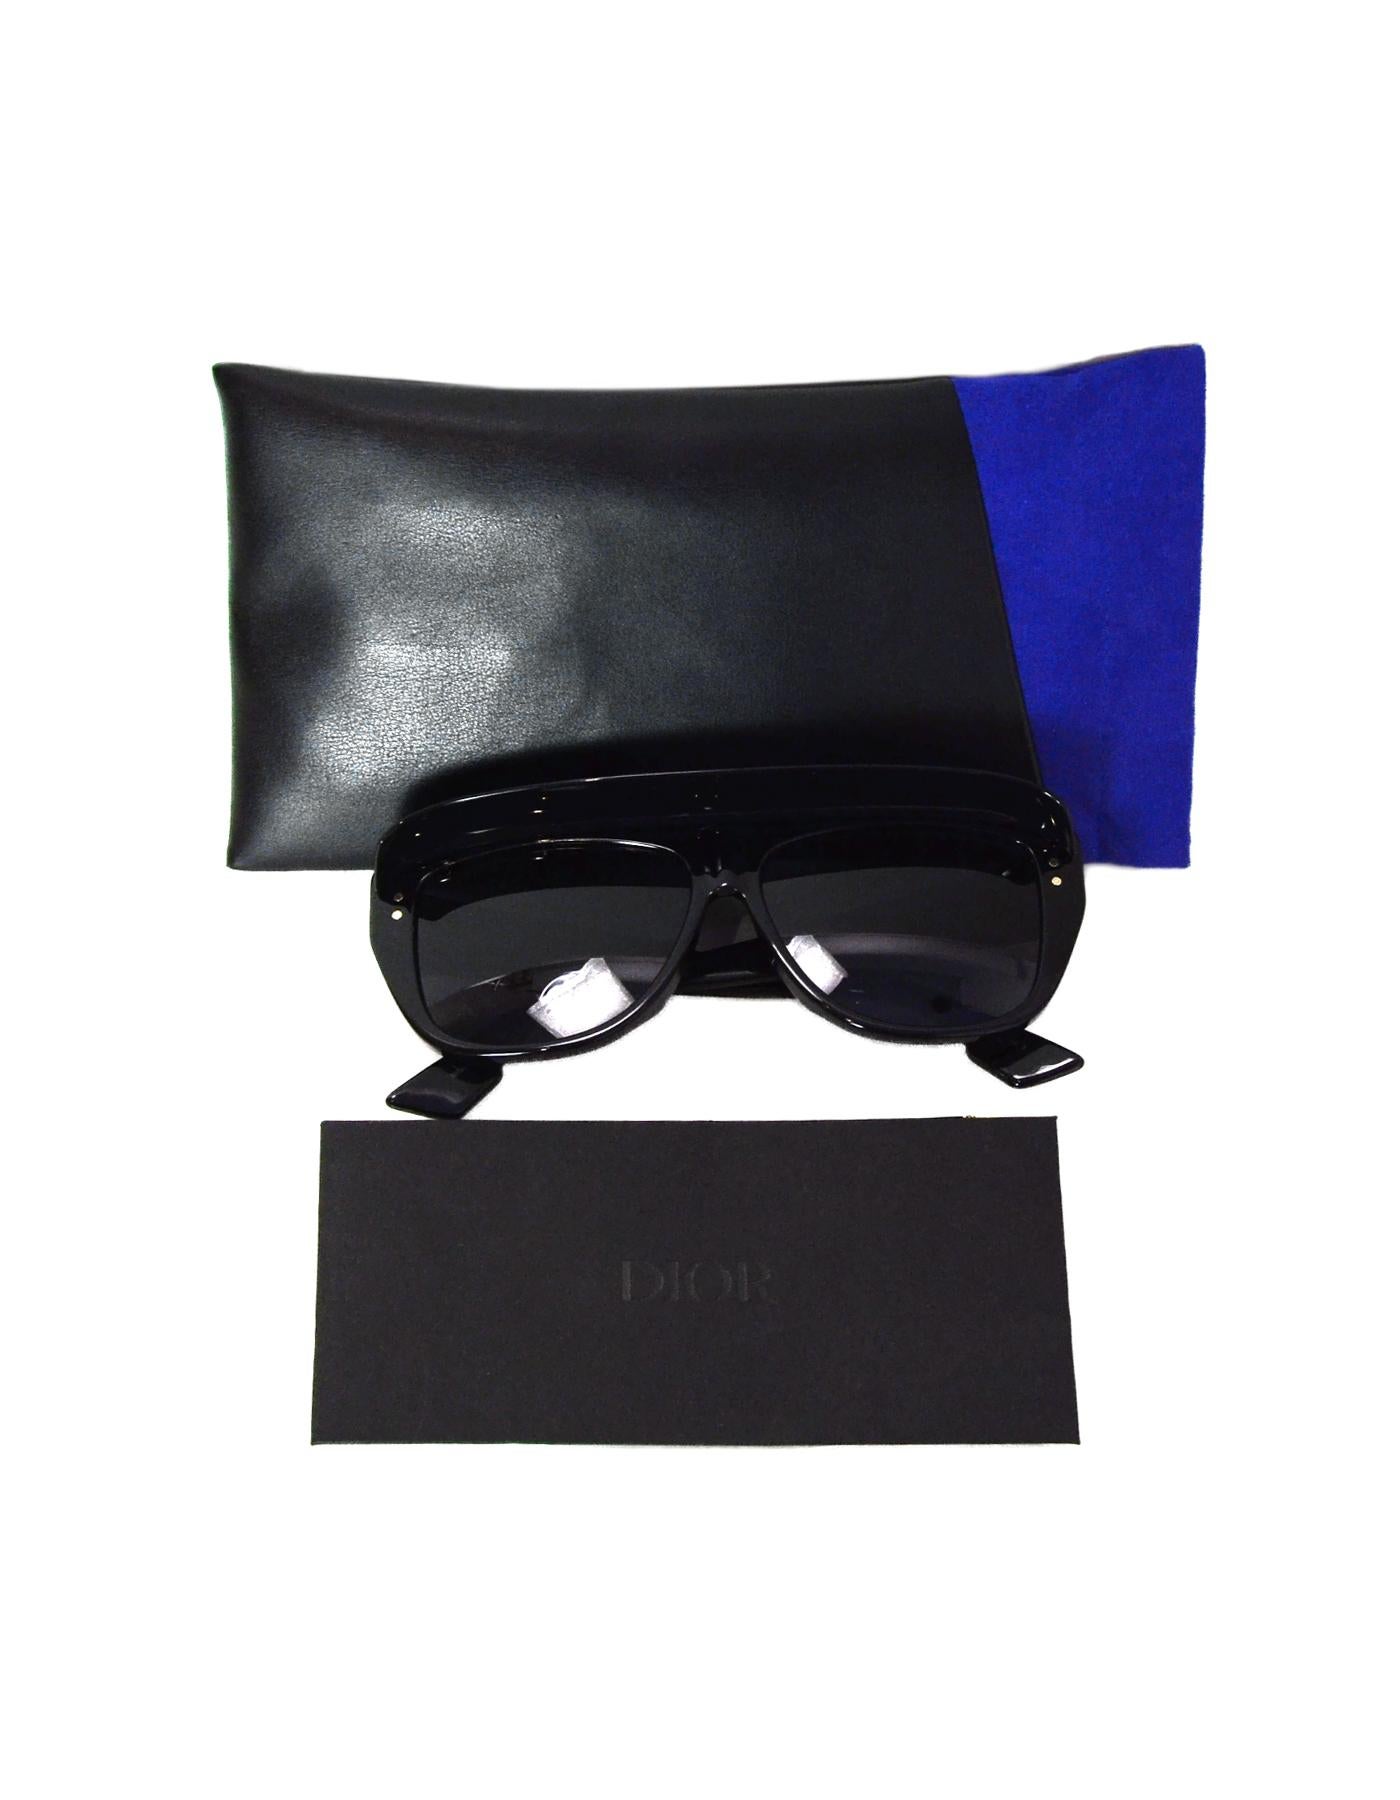 Dior Black DIORCLUB2 J'ADIOR Visor Sunglasses W/ Case

Made In: taly
Color: Black, white
Hardware: Goldtone
Materials: Resin
Overall Condition: Excellent pre-owned condition 
Estimated Retail: $440 + tax
Includes:  Dior case, plastic bag and